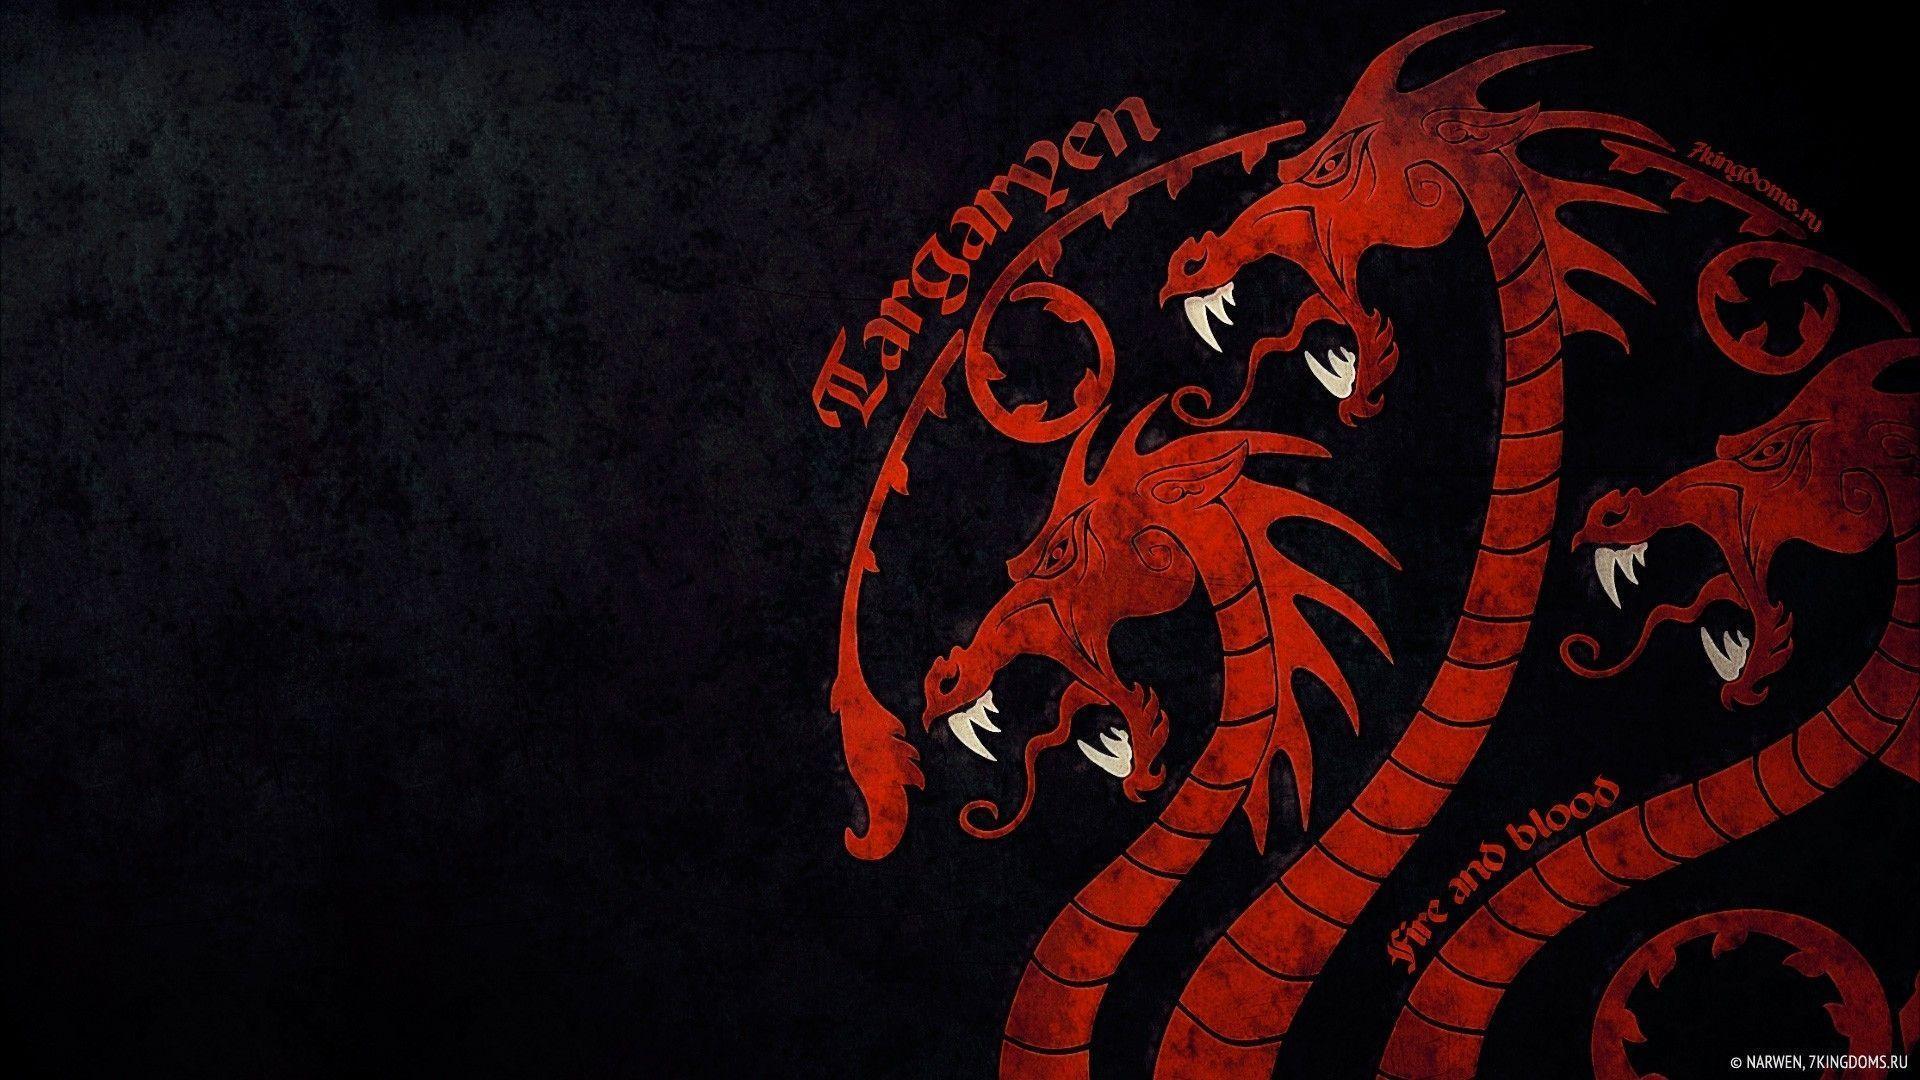 Wallpaper For > A Song Of Ice And Fire Wallpaper 1920x1080